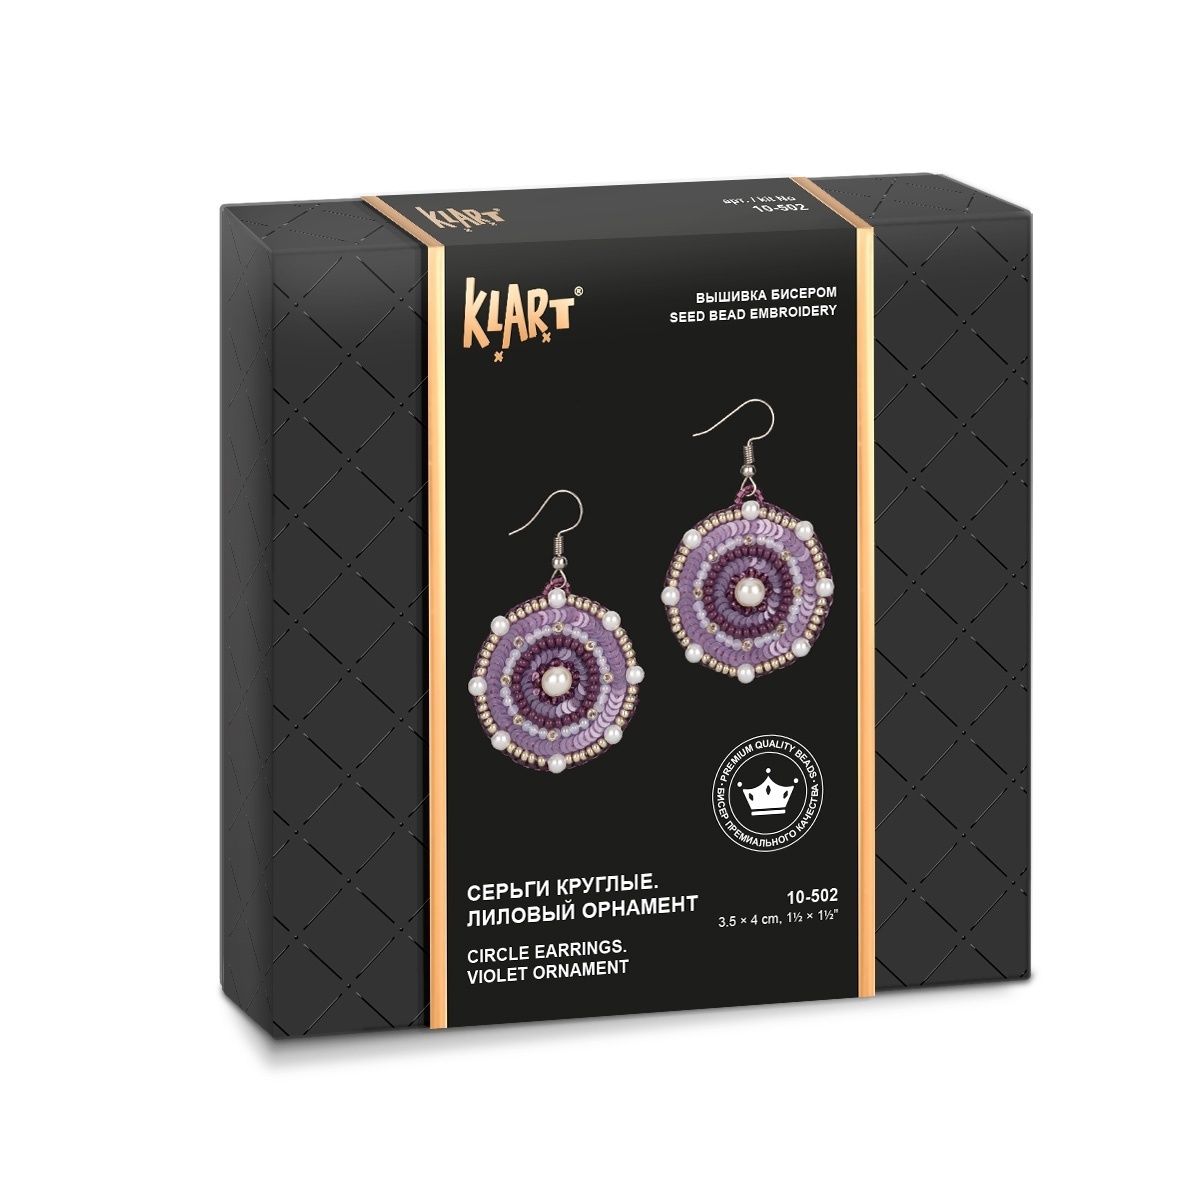 Circle Earrings. Violet Ornament Bead Embroidery Kit фото 2